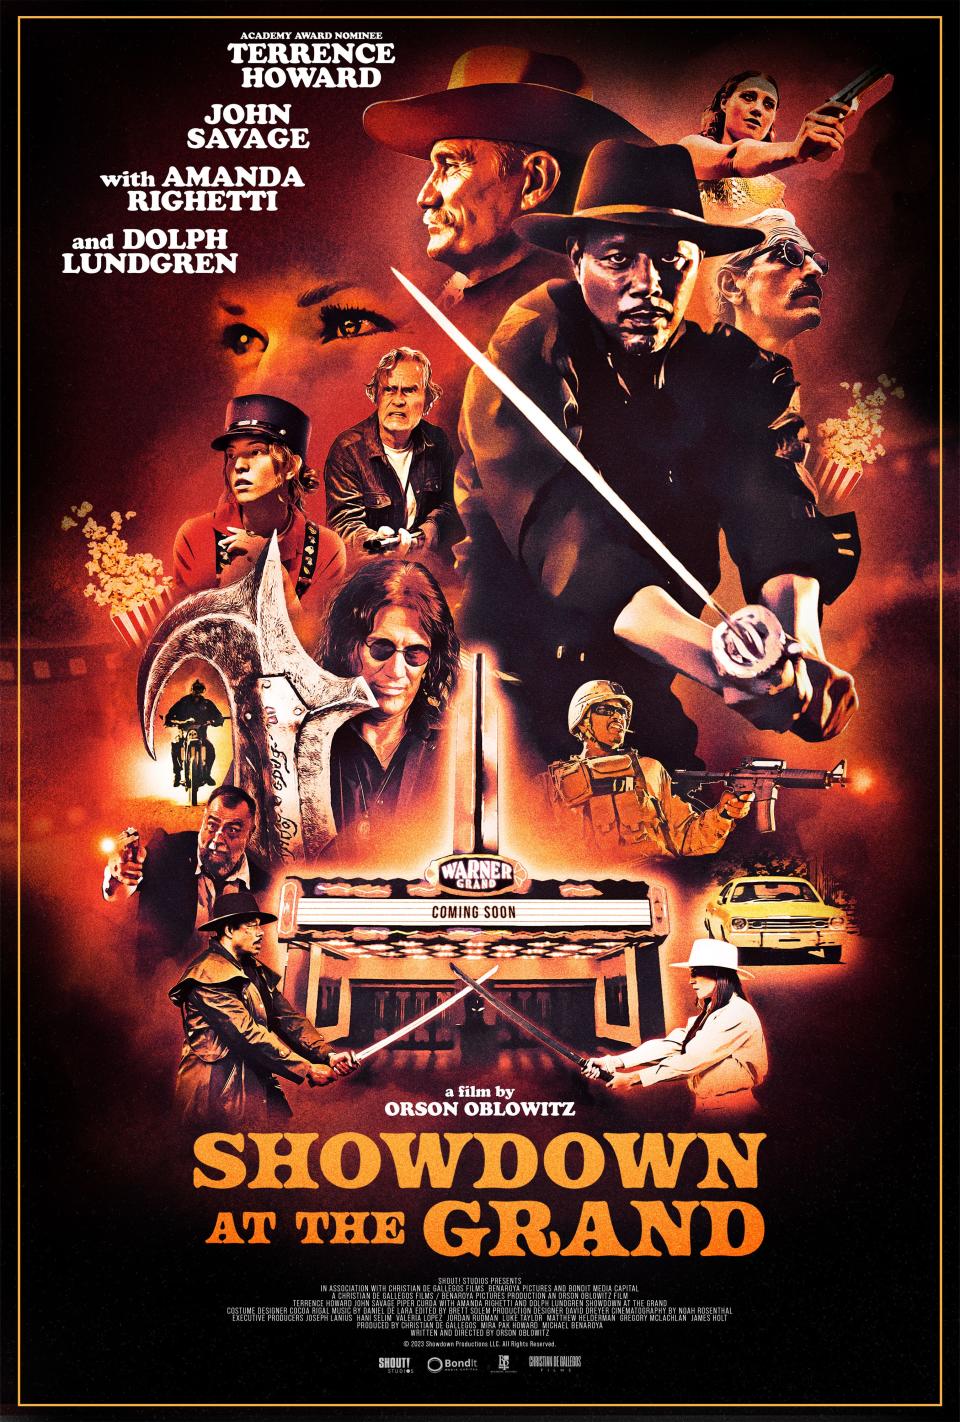 A vivid poster for "Showdown at the Grand."